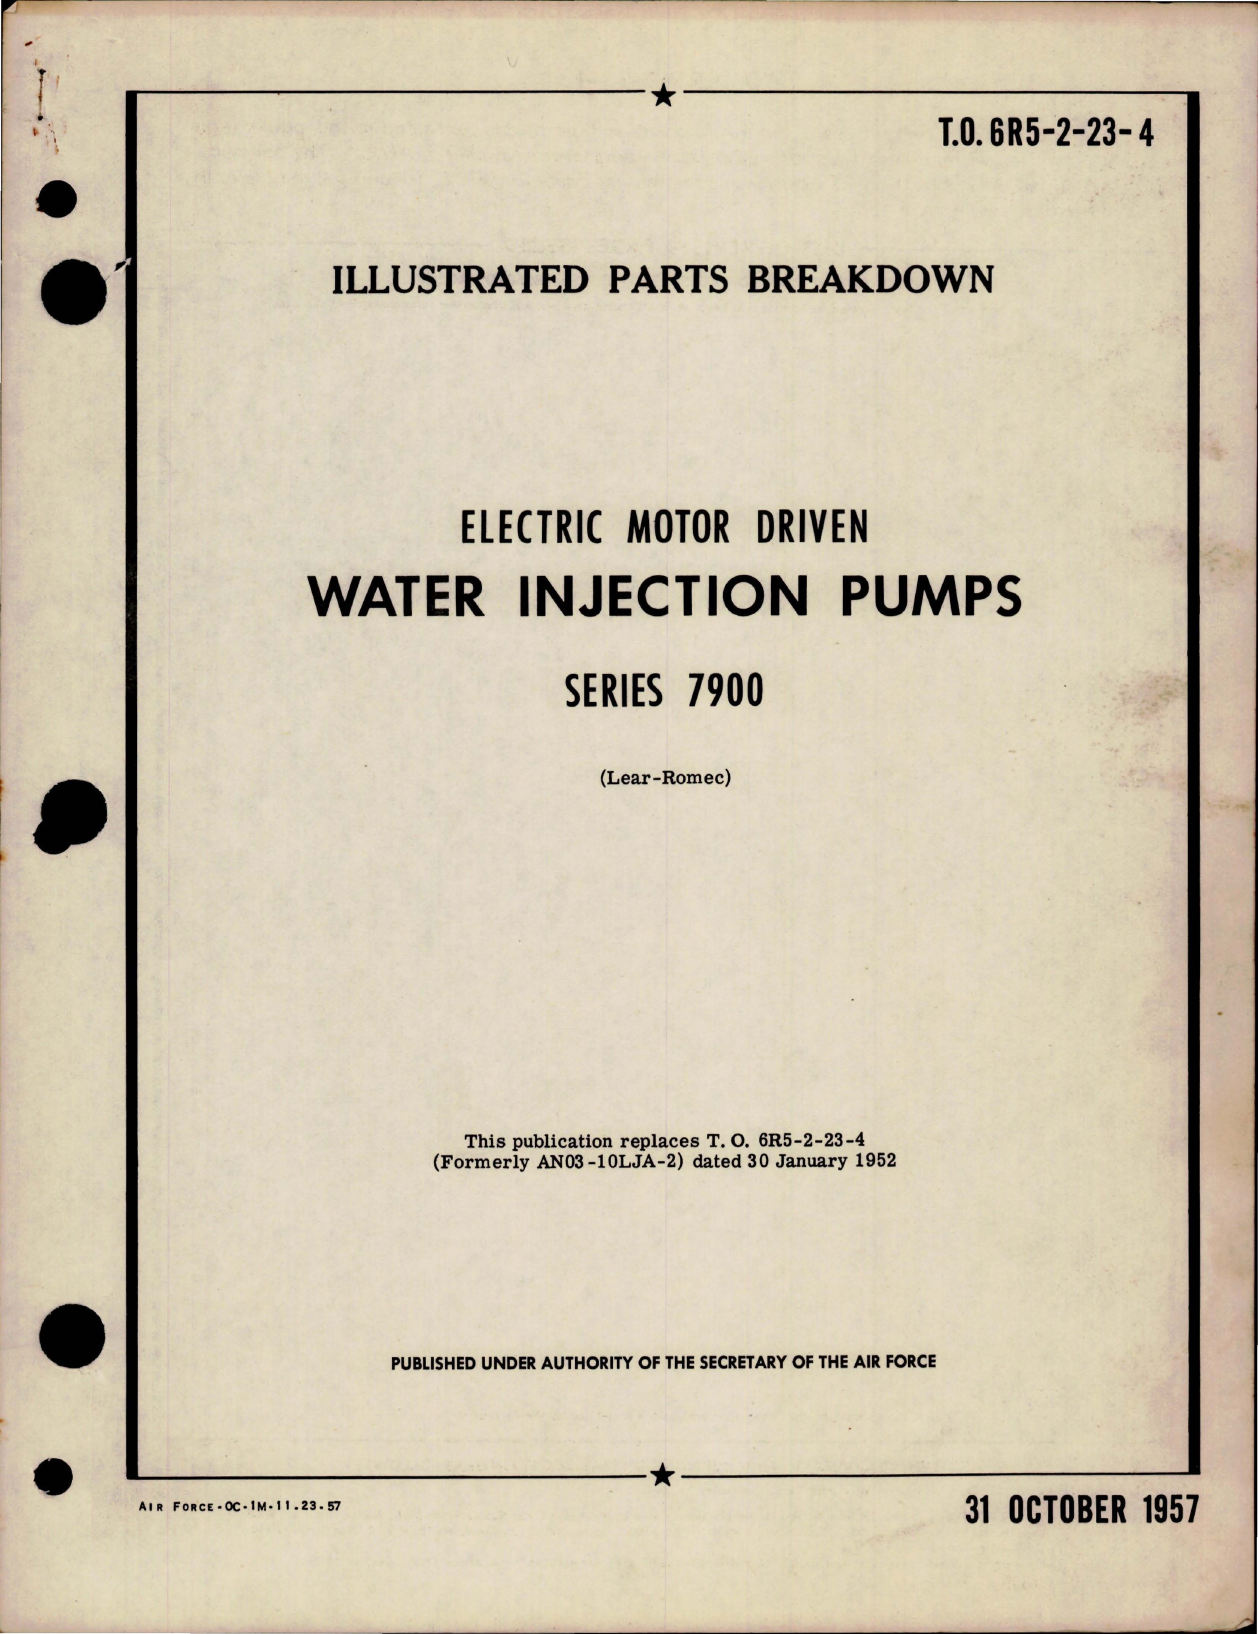 Sample page 1 from AirCorps Library document: Illustrated Parts Breakdown for Electric Motor Driven Water Injection Pump - Series 7900 